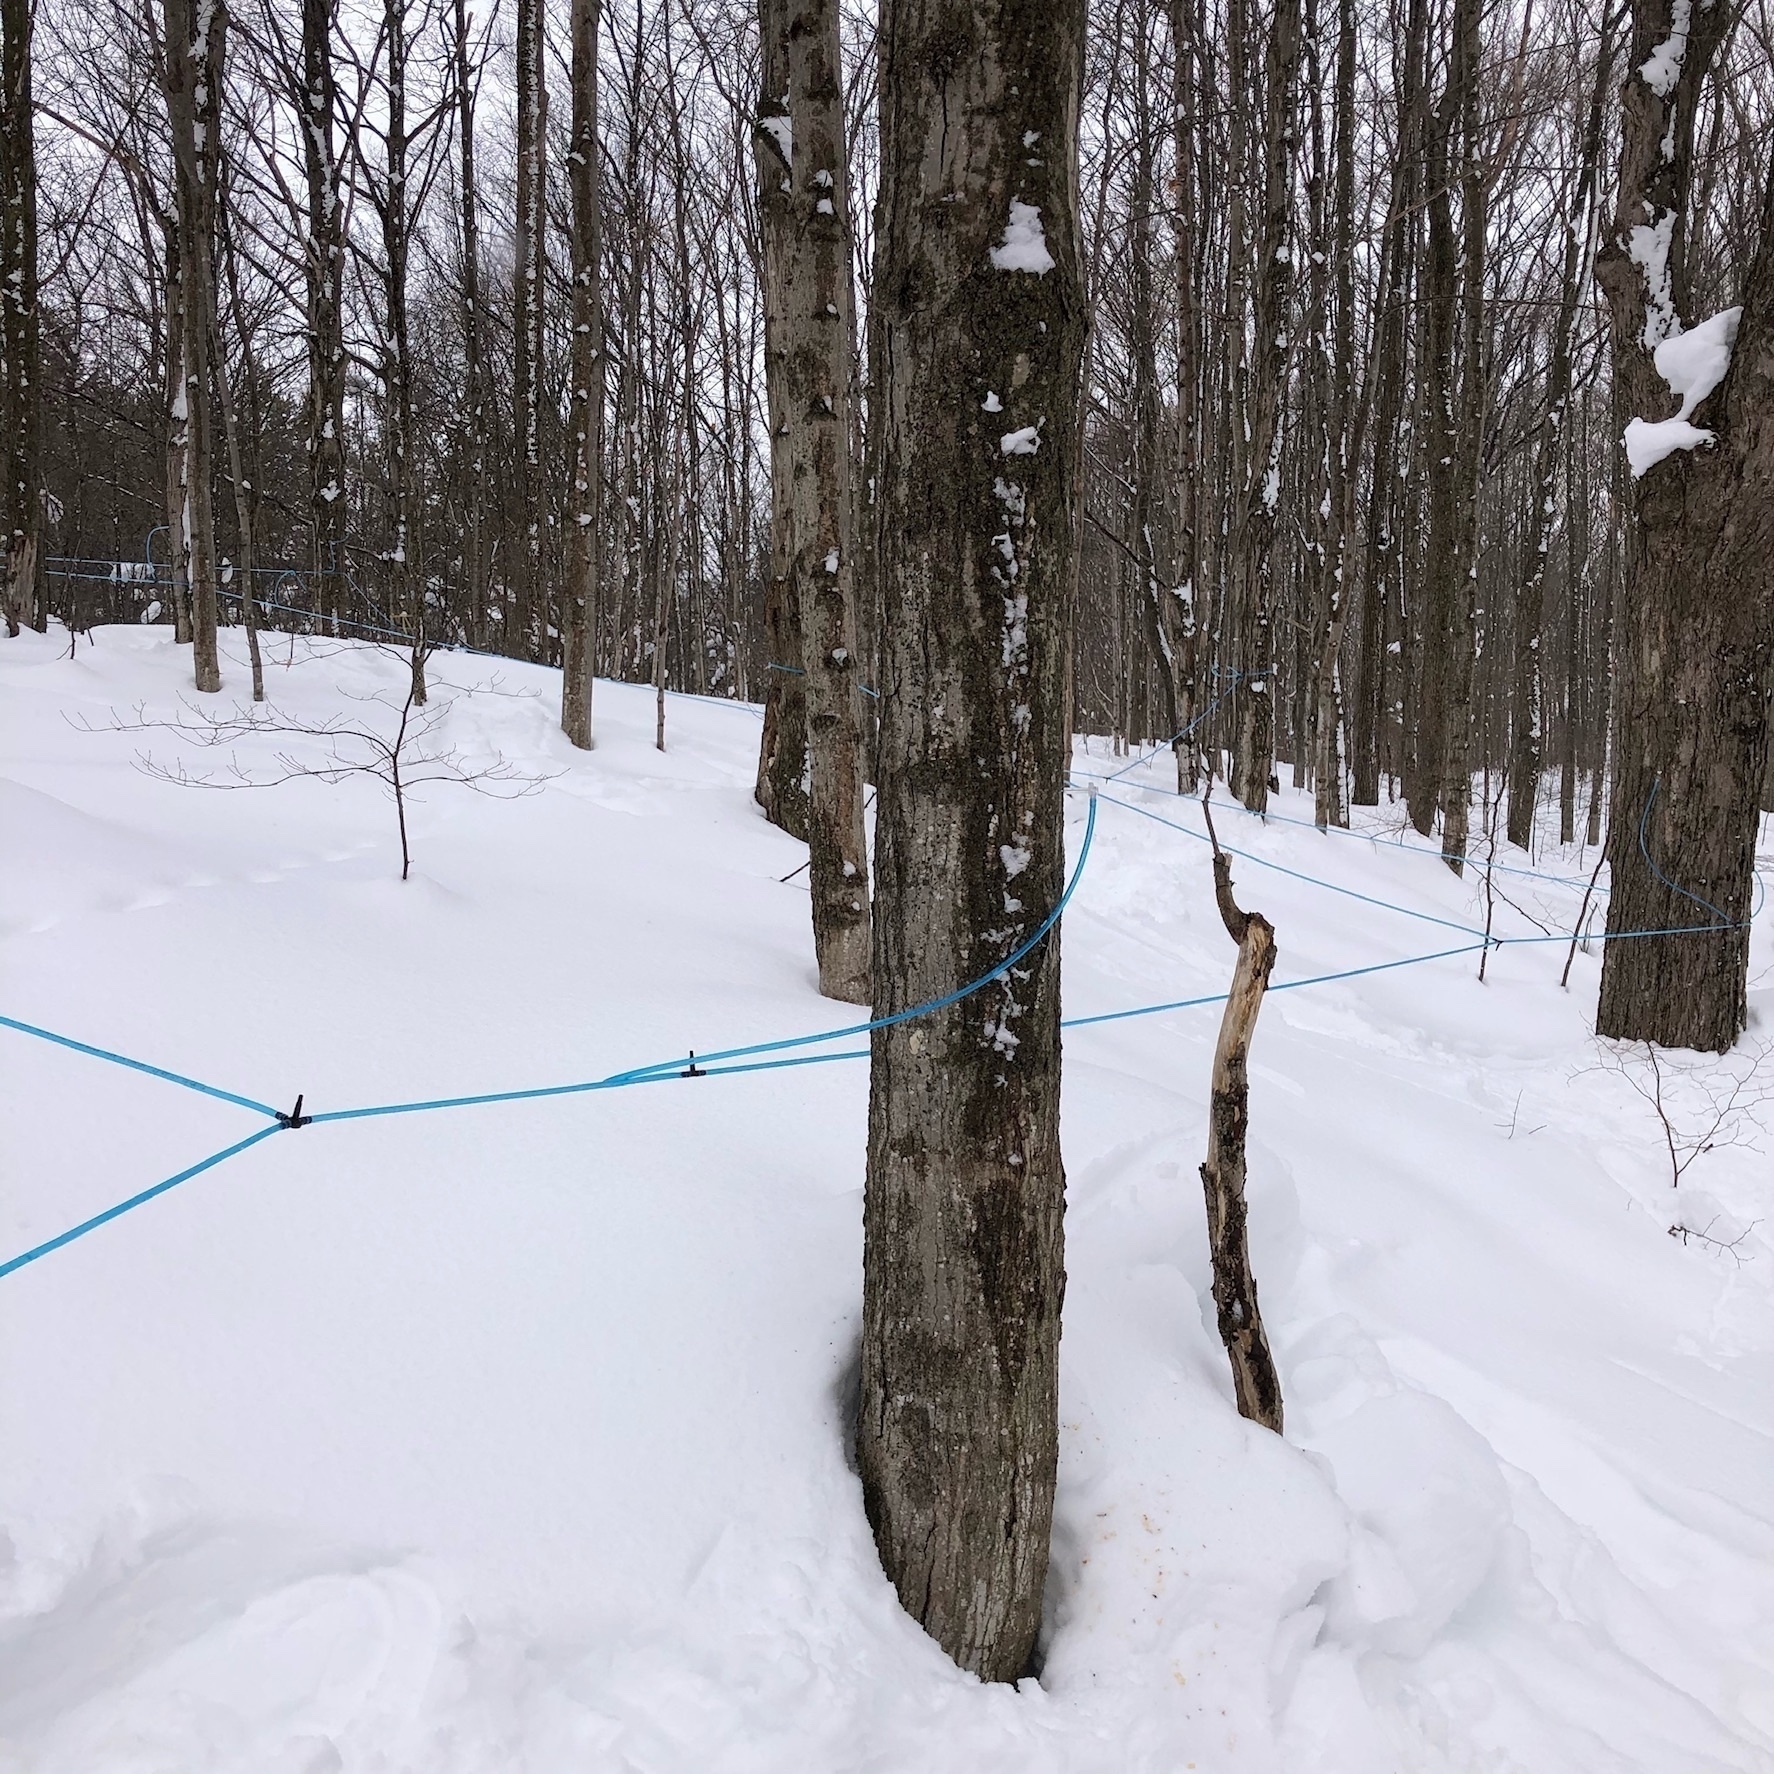 several maple trees on the side of a snow-covered hill. blue tubing connects many of the trees. there is snow on the side of many of the trees